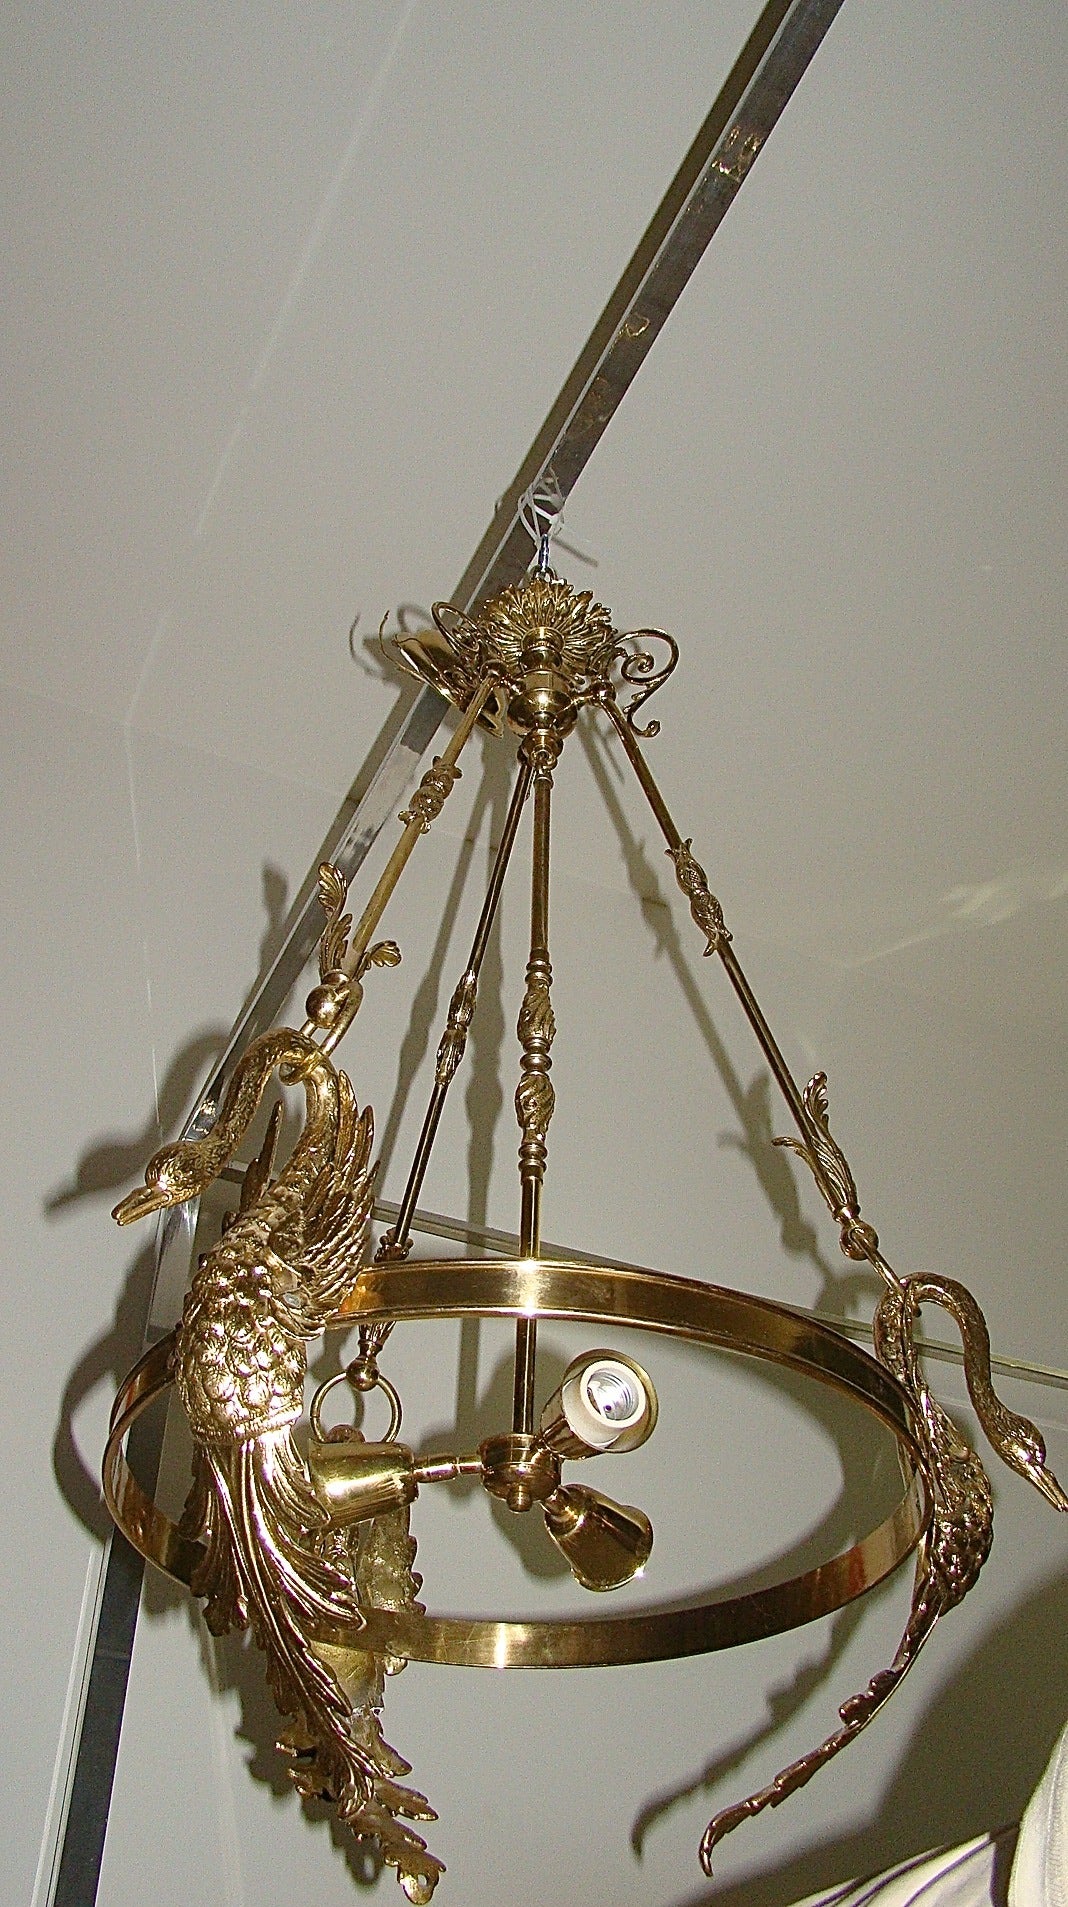 Glamorous Italian brass Empire style sculptural swan chandelier. This unique design is comprised of solid brass and depicts three swans with long necks each of which connects to a ring to support the fixture. Signed with metal made in Italy tag.